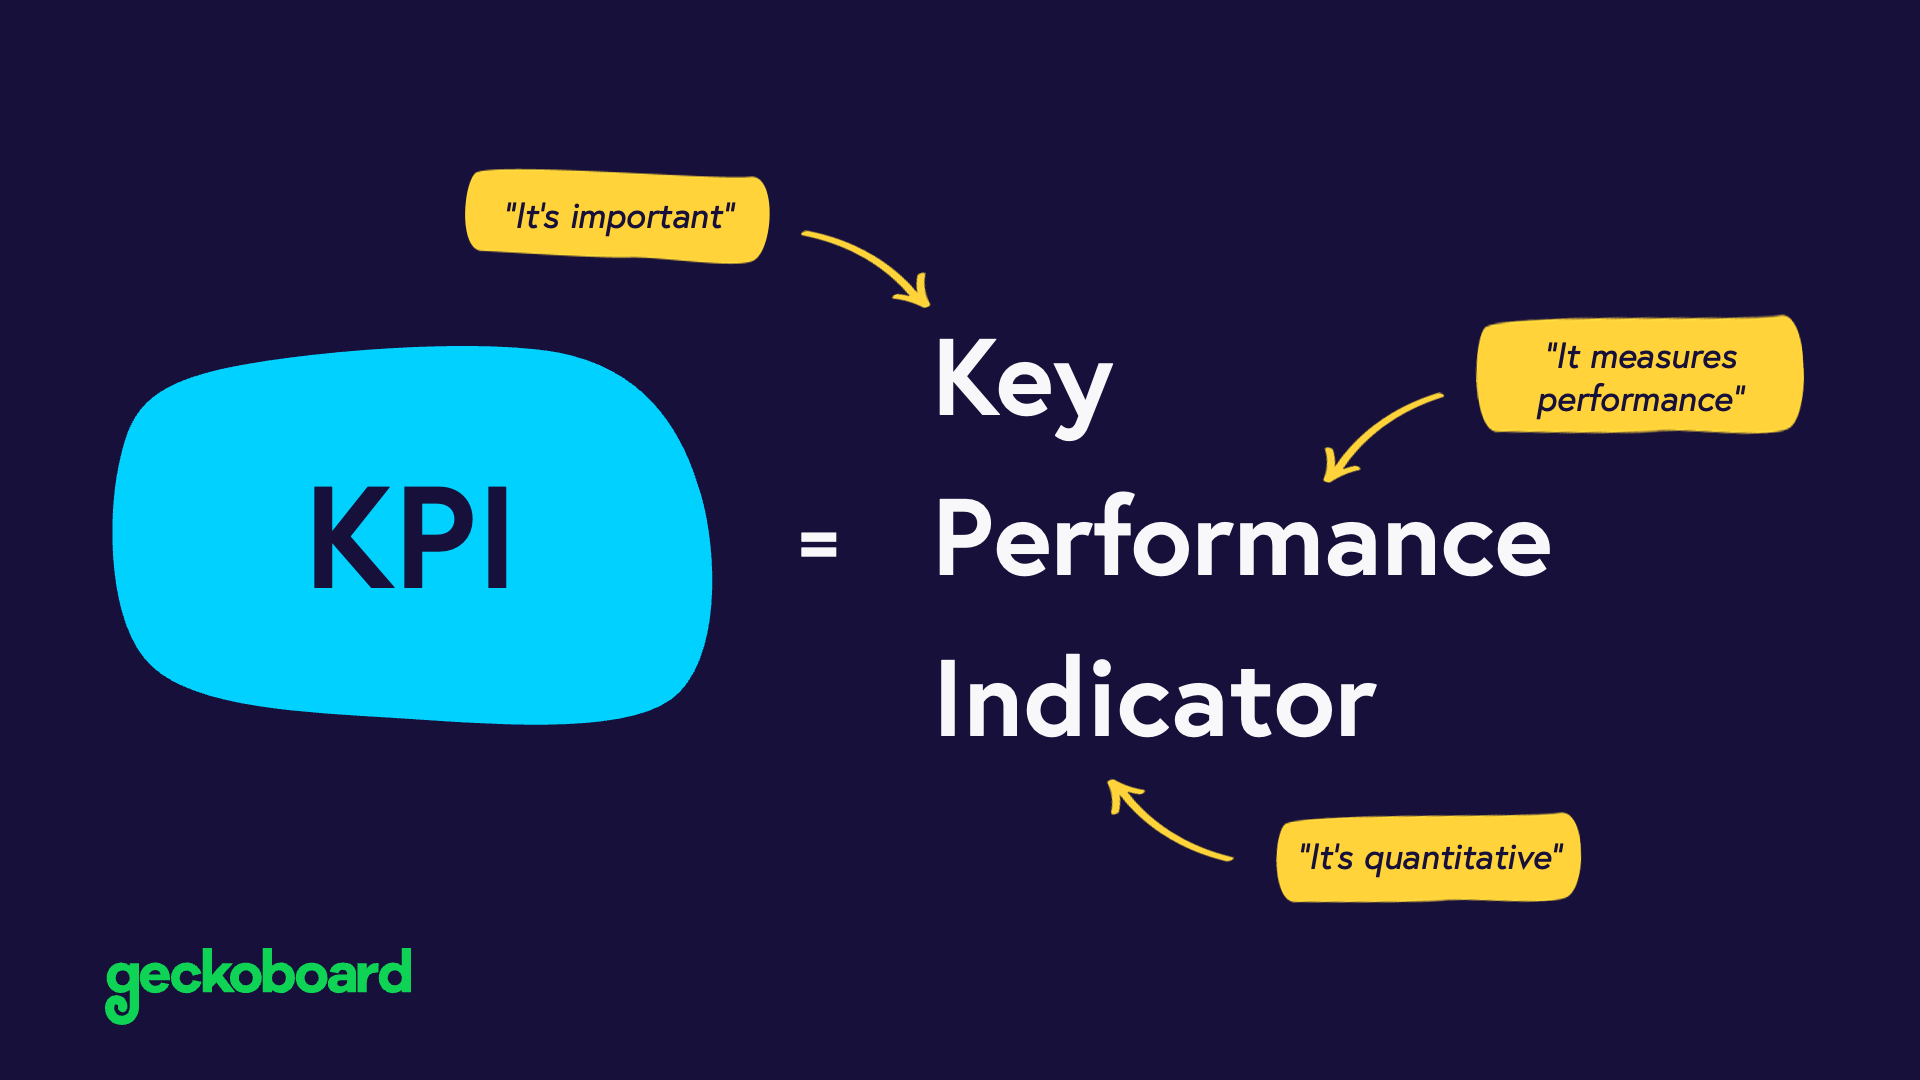 Visual illustration of the meaning of a KPI